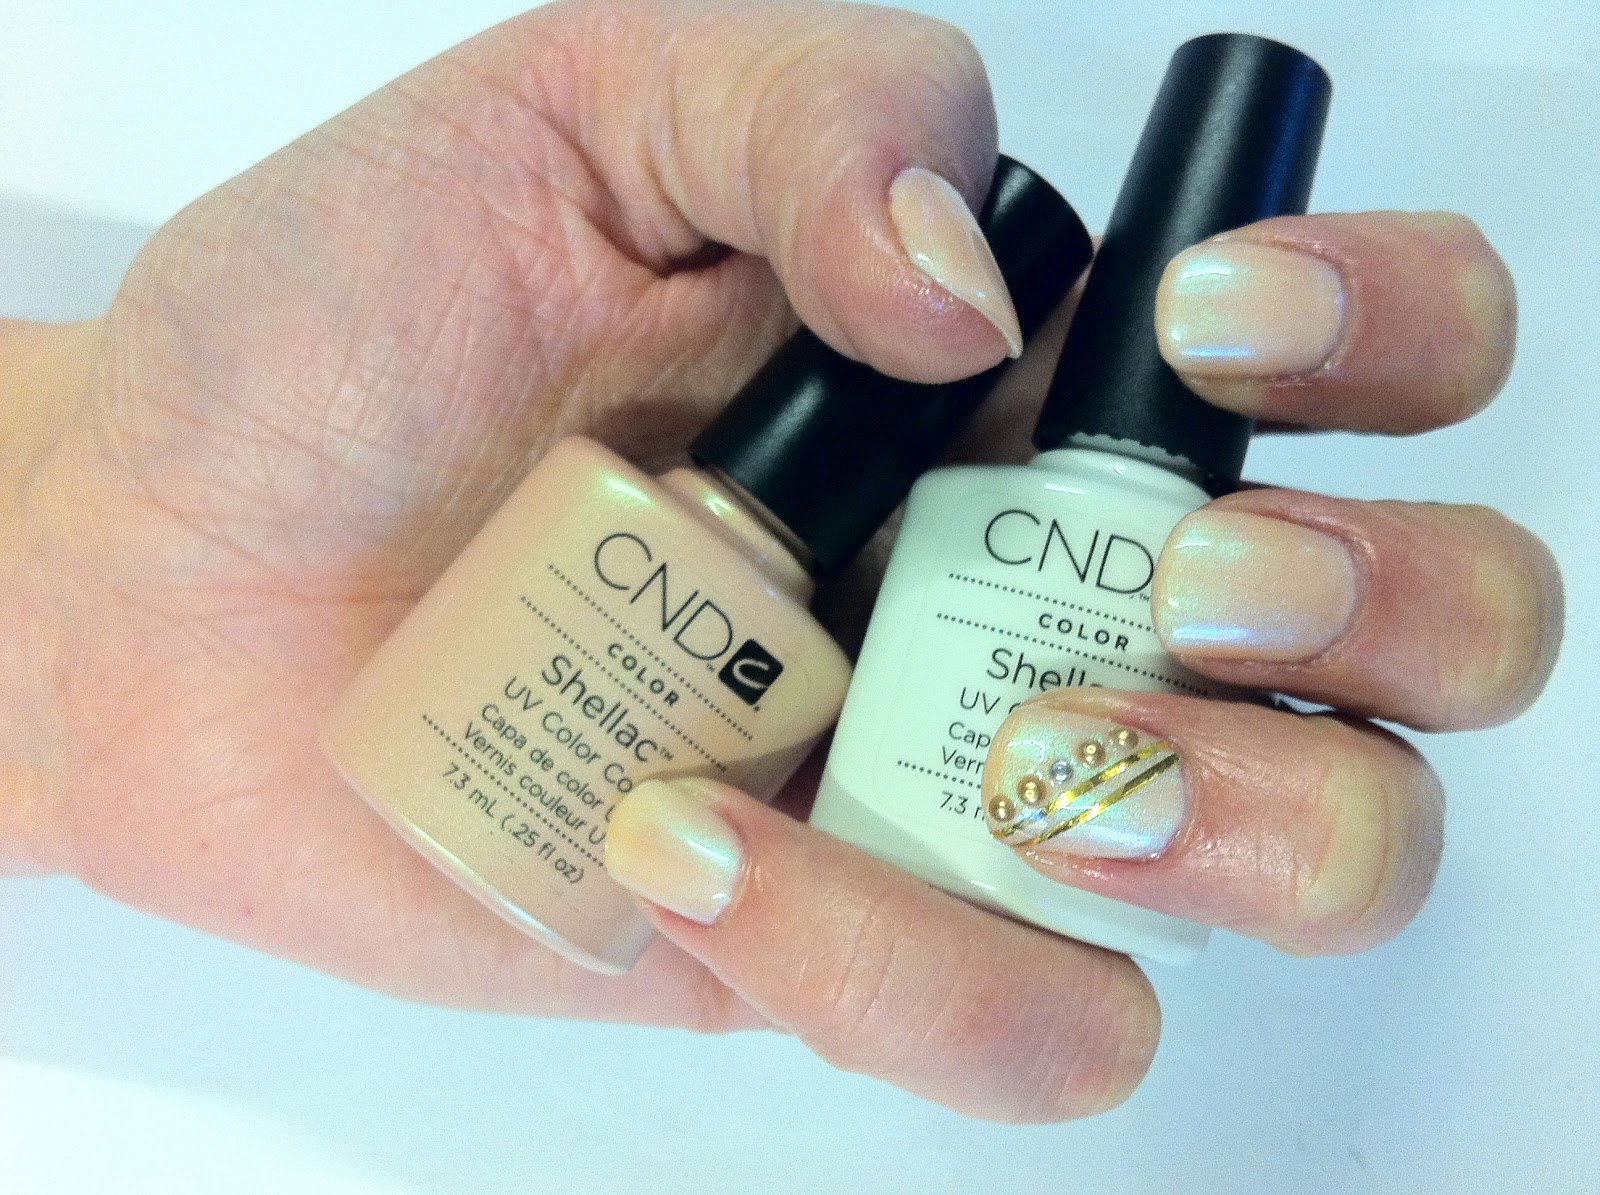 10. CND Shellac Nail Art Products - wide 3